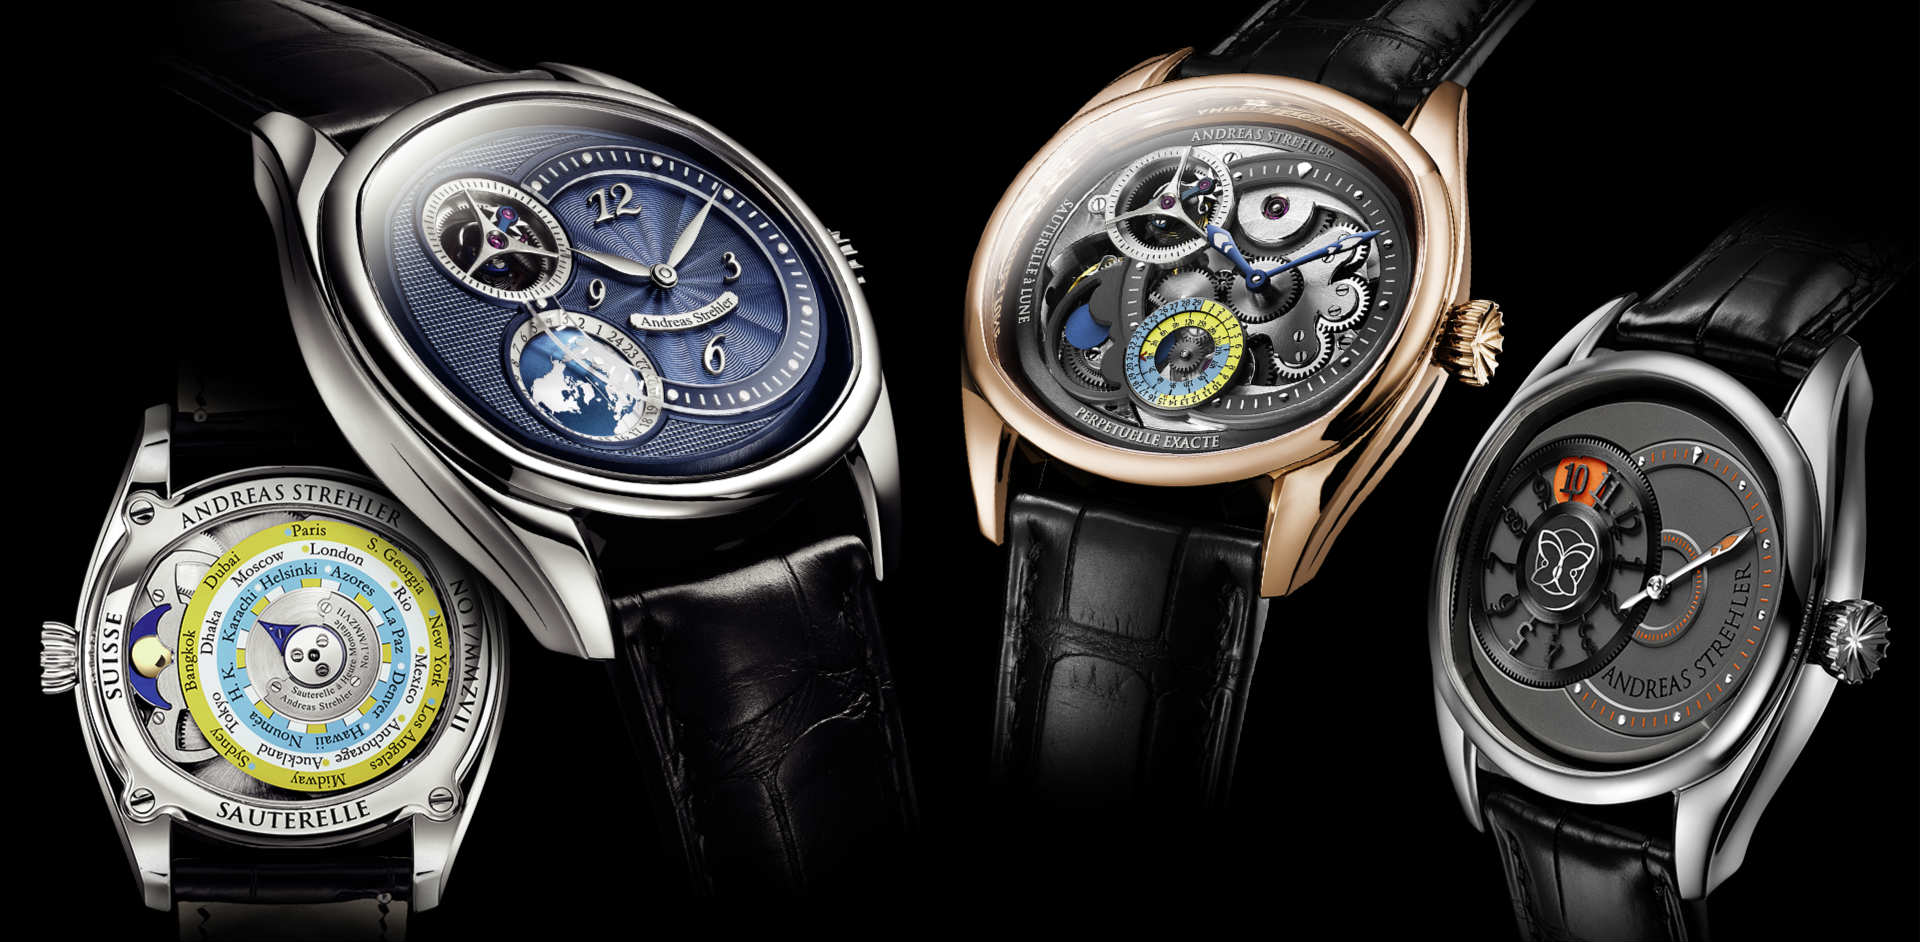 Andreas Strehler watches